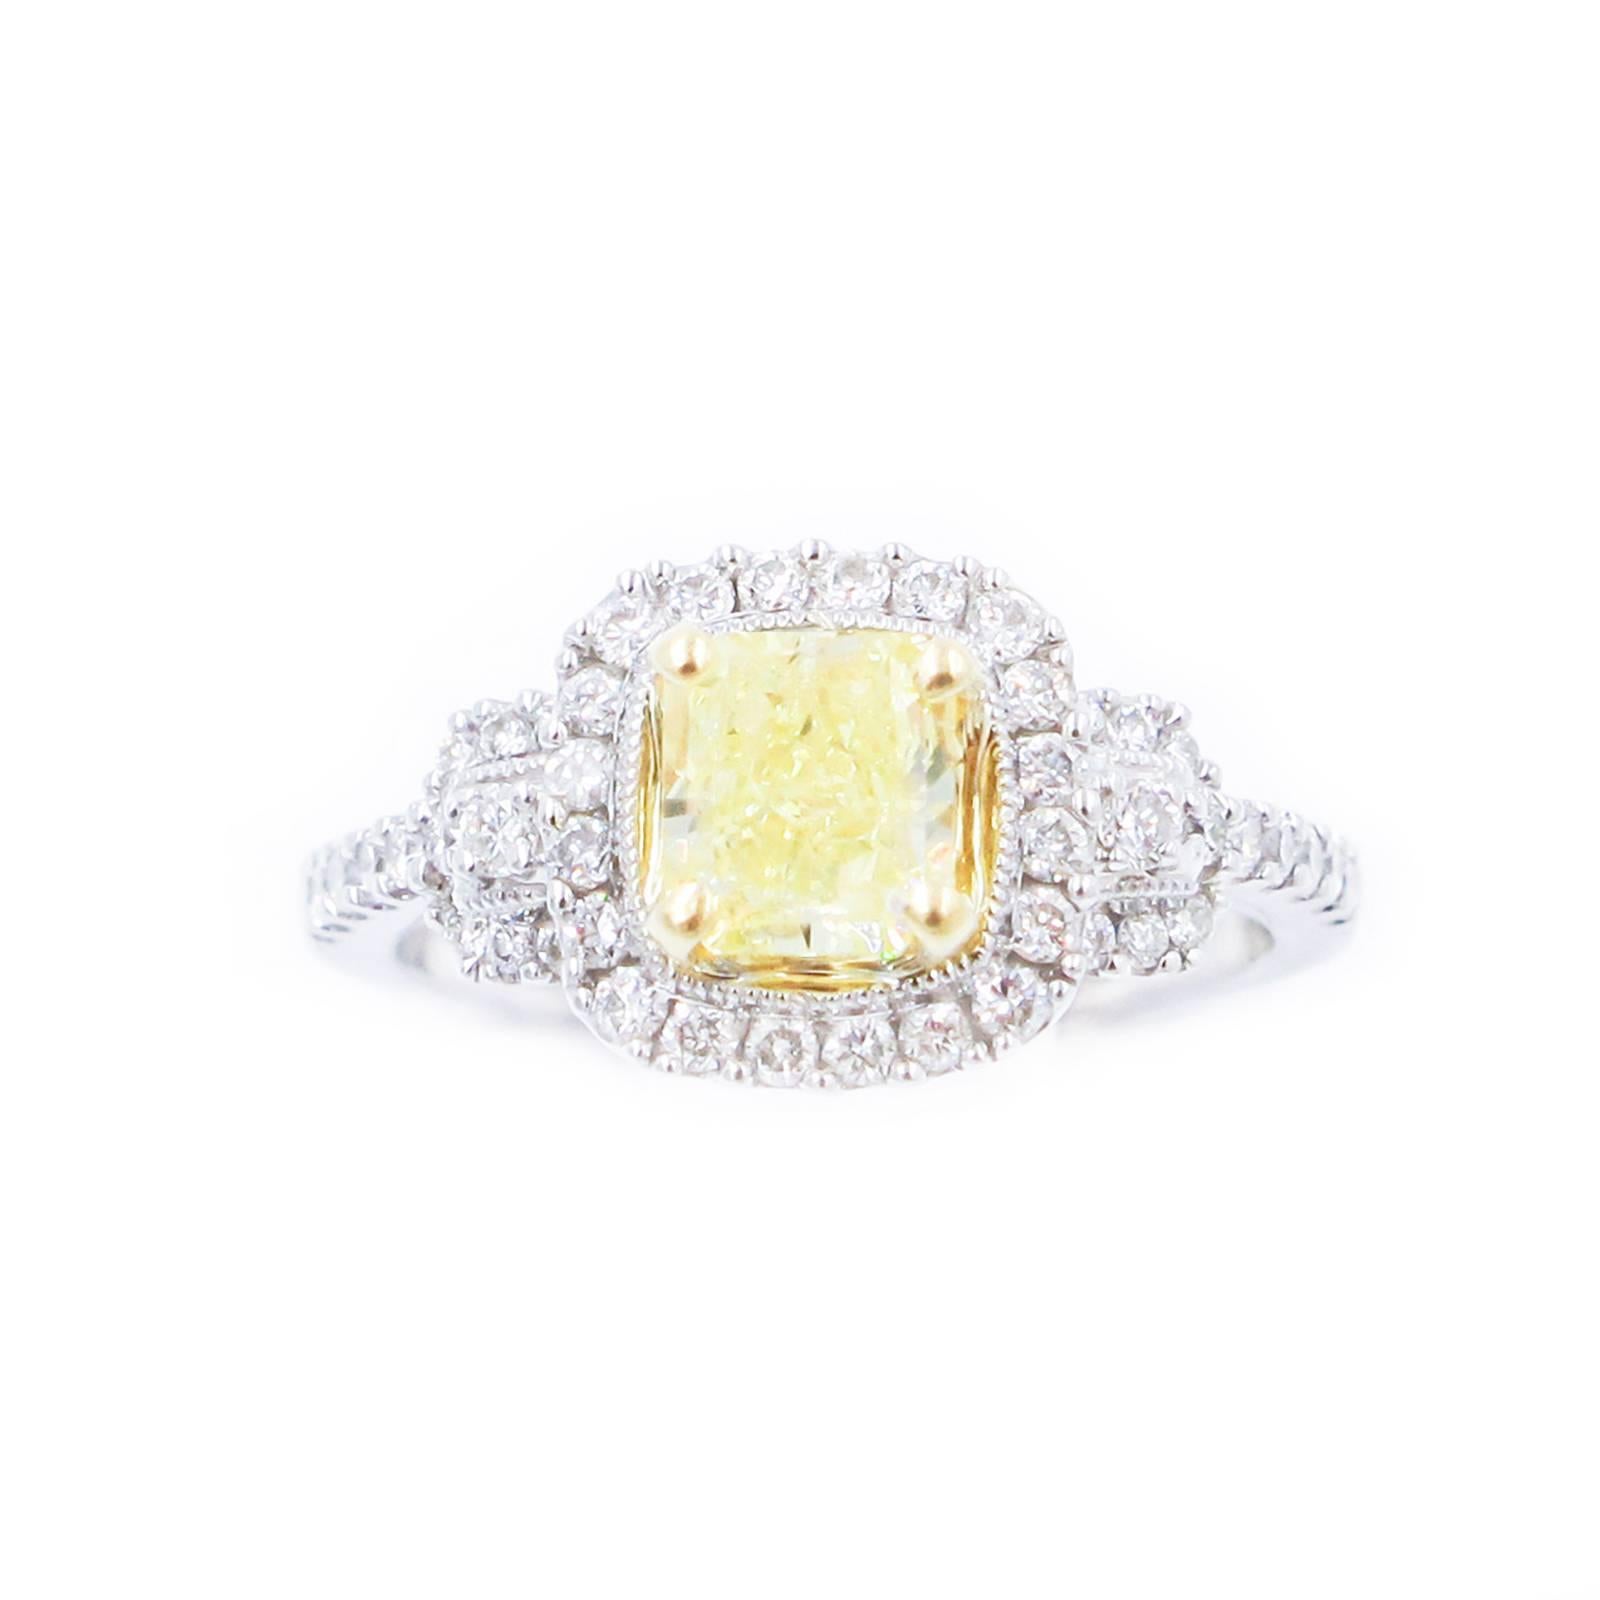 This very pretty halo ring features a center set Radiant Cut Fancy Yellow Diamond of .95 carat. The stone is rated Medium Strong Yellow intensity. The  surround contains 70 small VS-SI round, Brilliant Cut clear Diamonds running down the sides.